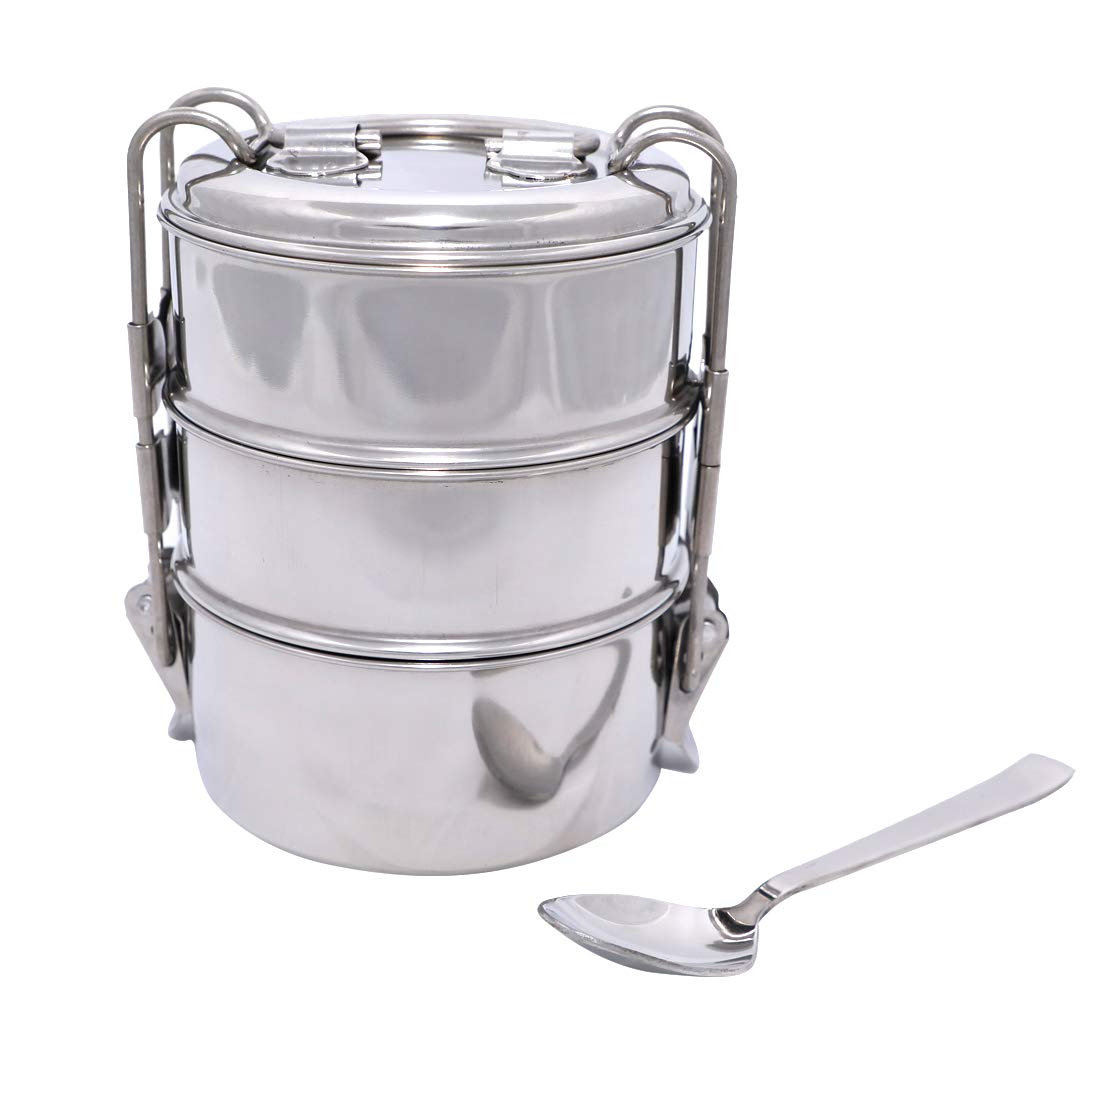 Stainless Steel 3 Tier Jeniffer Lunch Box with Insulated Bag-10 cm